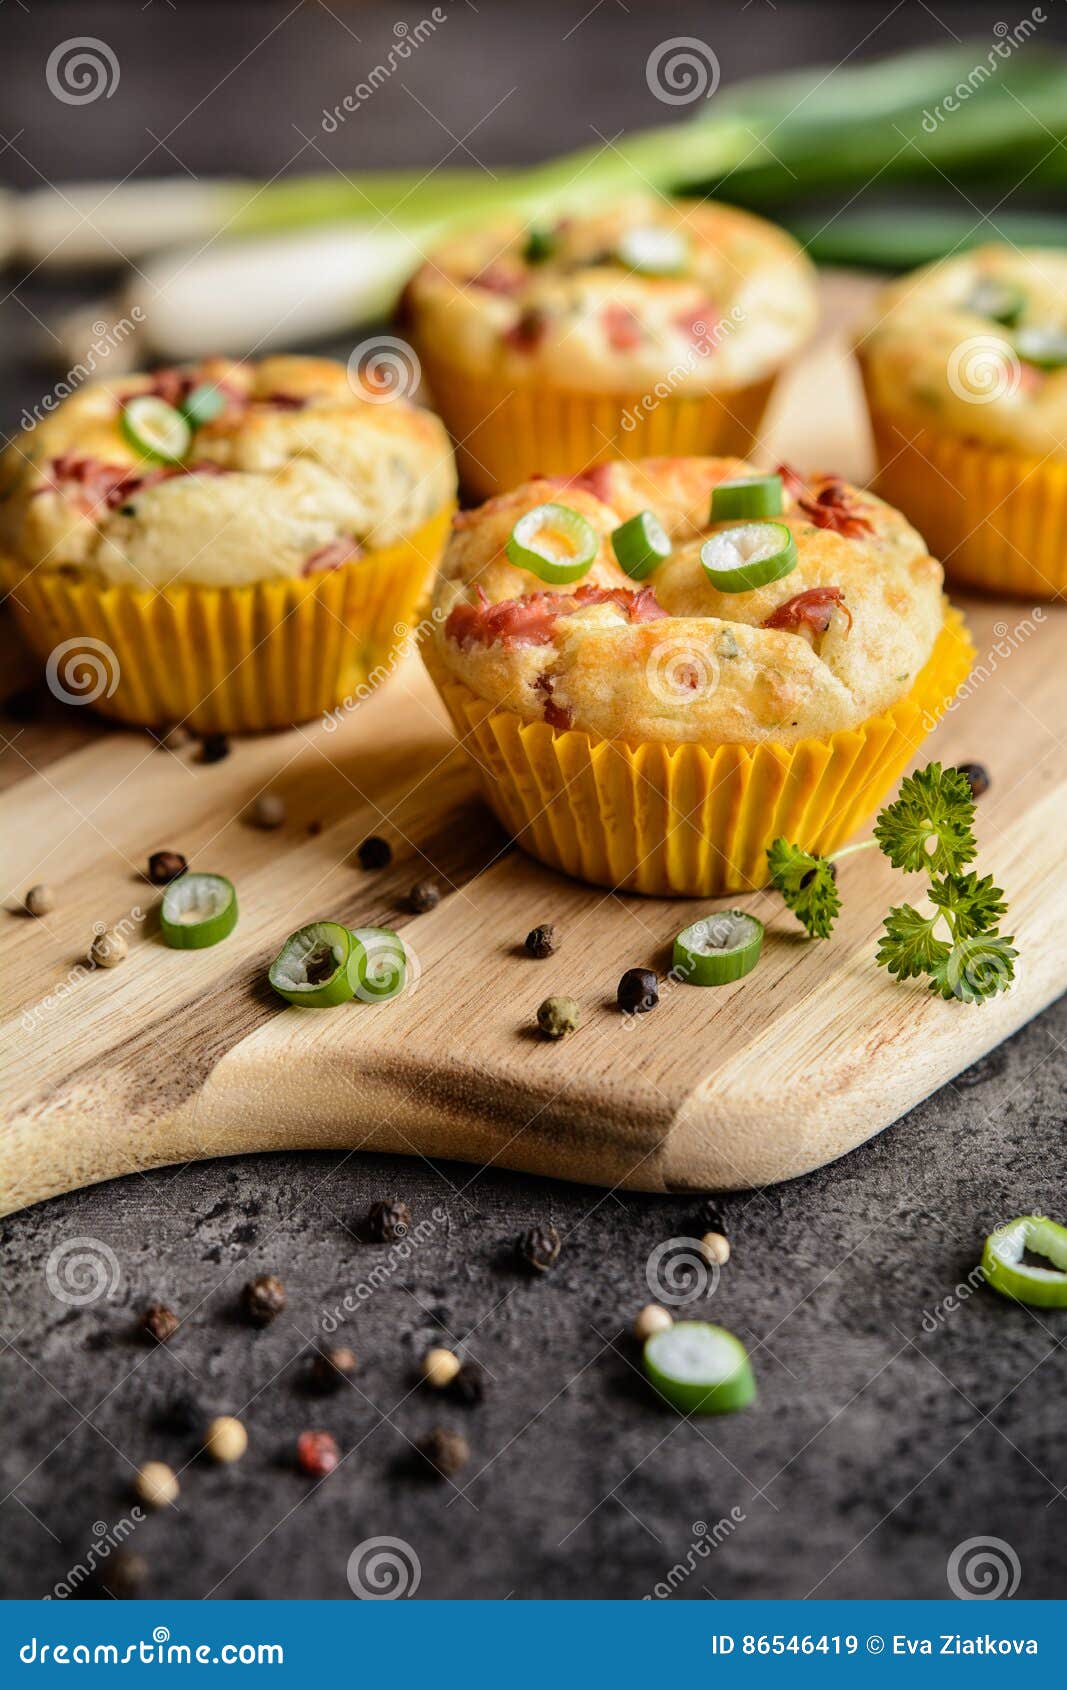 Salty Bacon Muffins with Onion Stock Image - Image of birthday, food ...